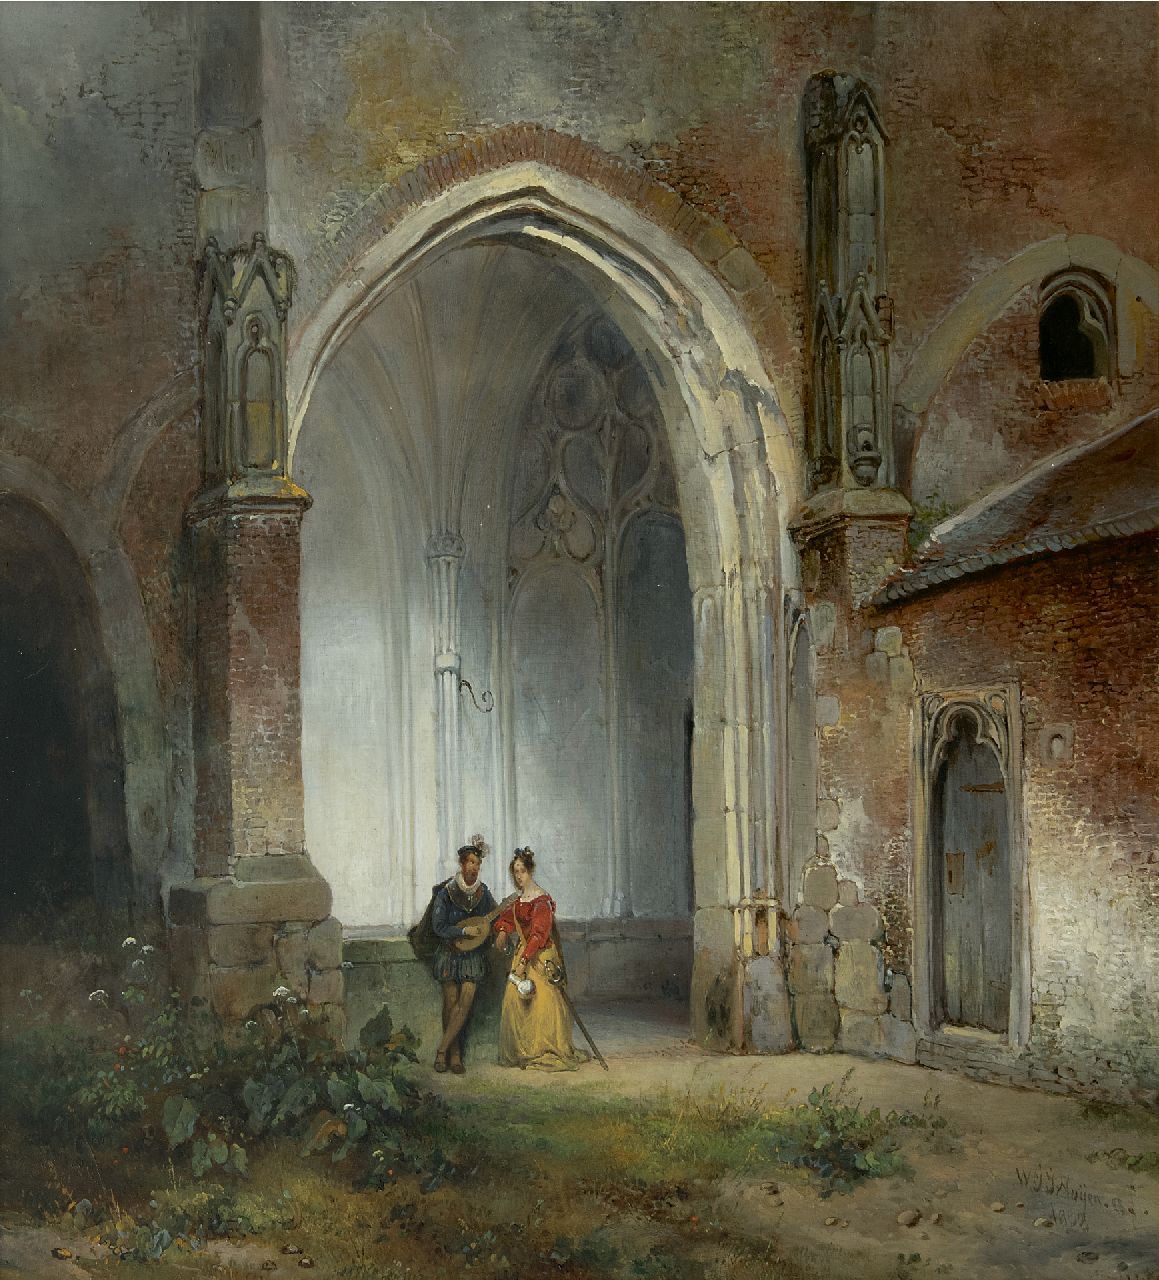 Nuijen W.J.J.  | Wijnandus Johannes Josephus 'Wijnand' Nuijen | Paintings offered for sale | A man and woman in the cloister of the Dom Church in Utrecht, oil on panel 49.0 x 44.8 cm, signed l.r. and dated 1832